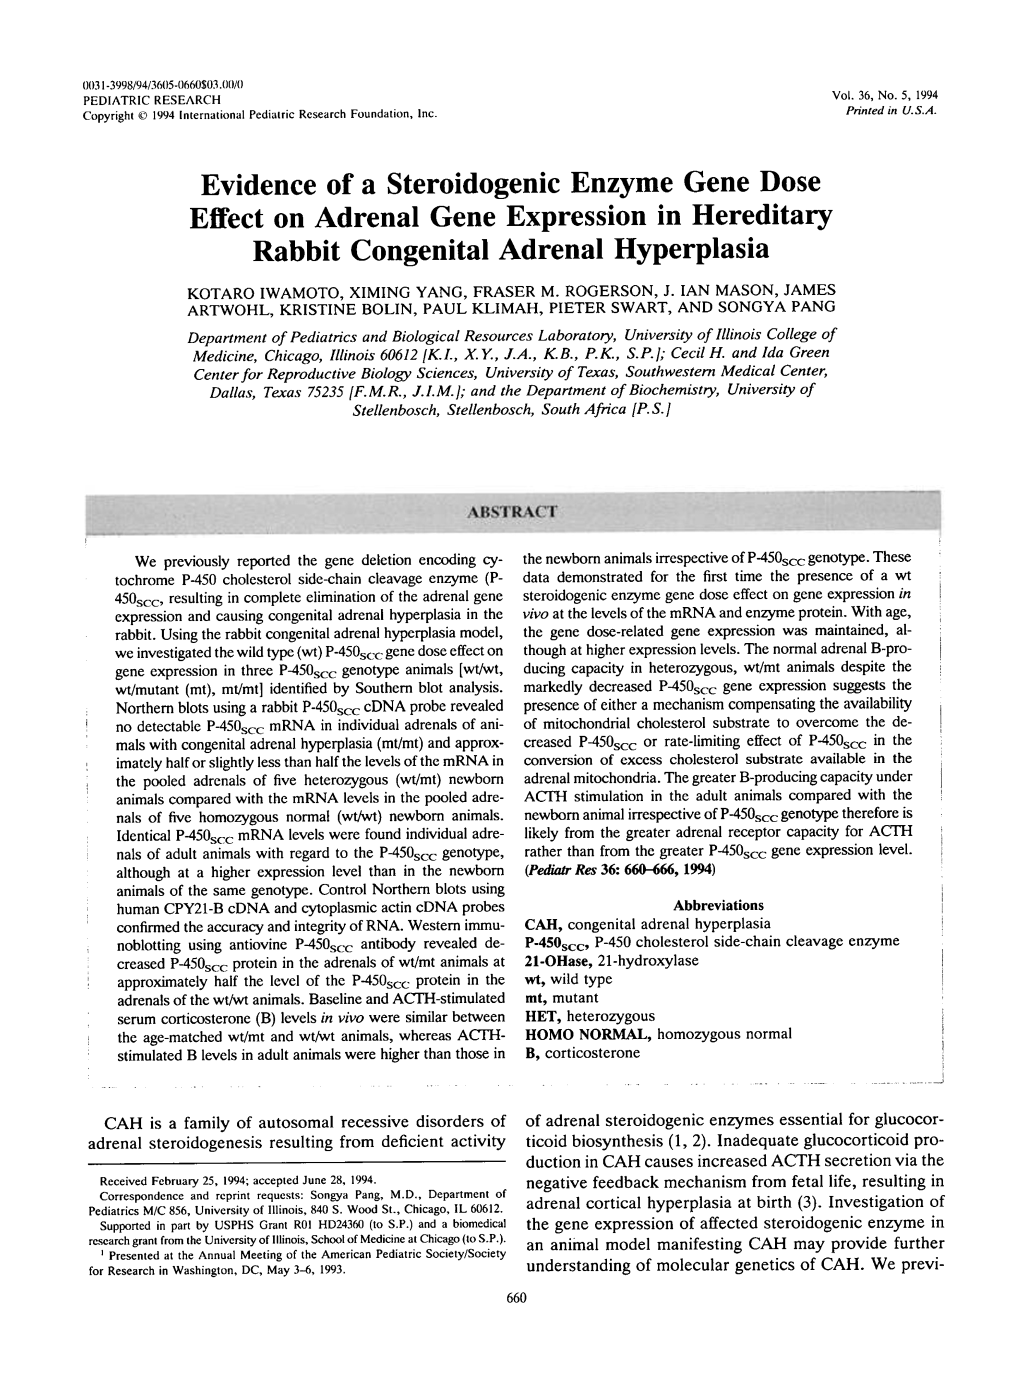 Evidence of a Steroidogenic Enzyme Gene Dose Effect on Adrenal Gene Expression in Hereditary Rabbit Congenital Adrenal Hyperplasia